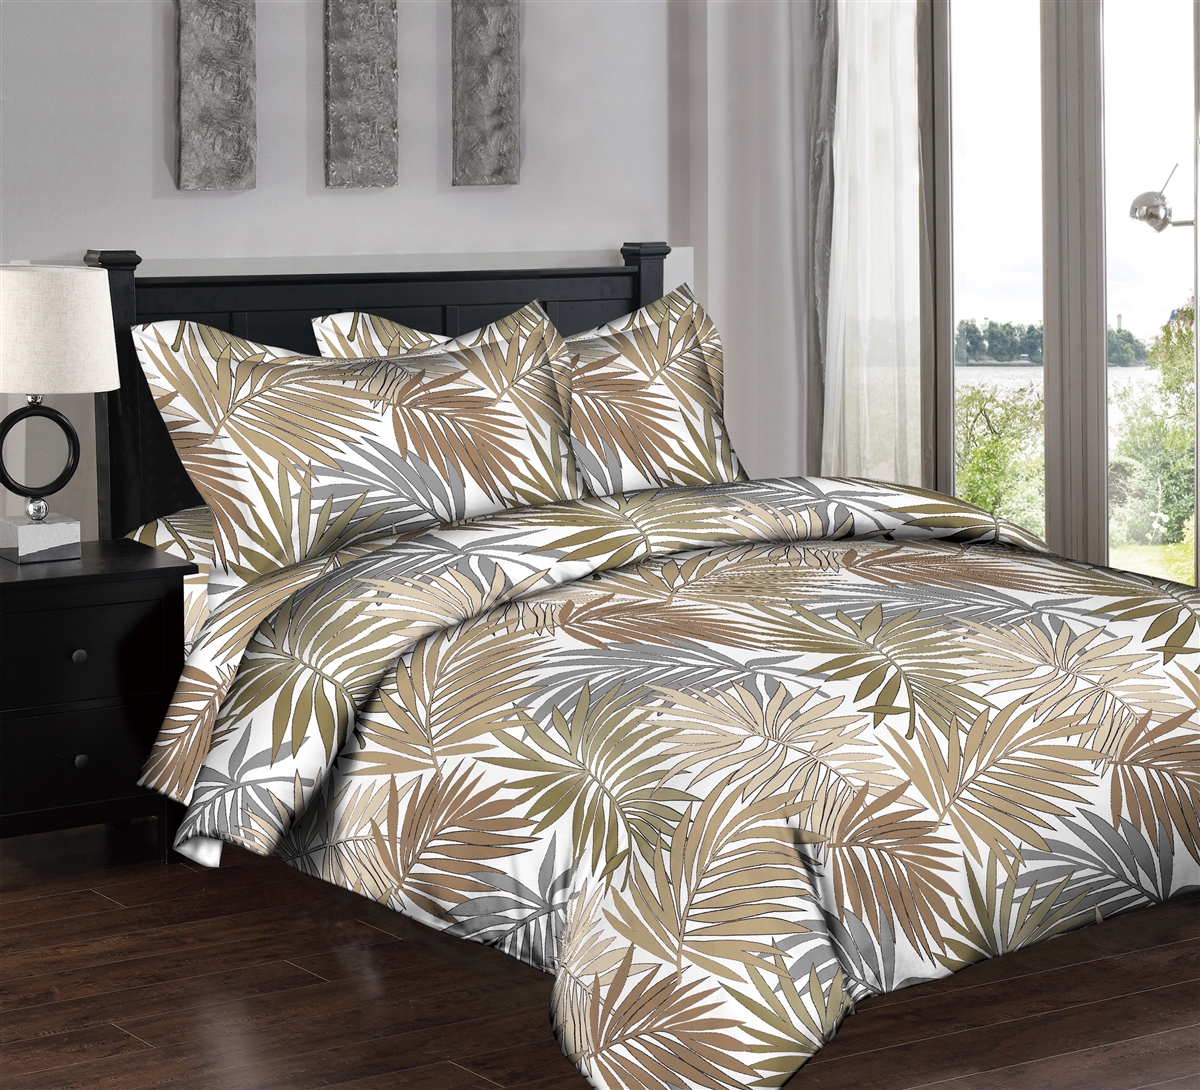 Superiority Linen: Tropical Leaves 6pc Bedding Set